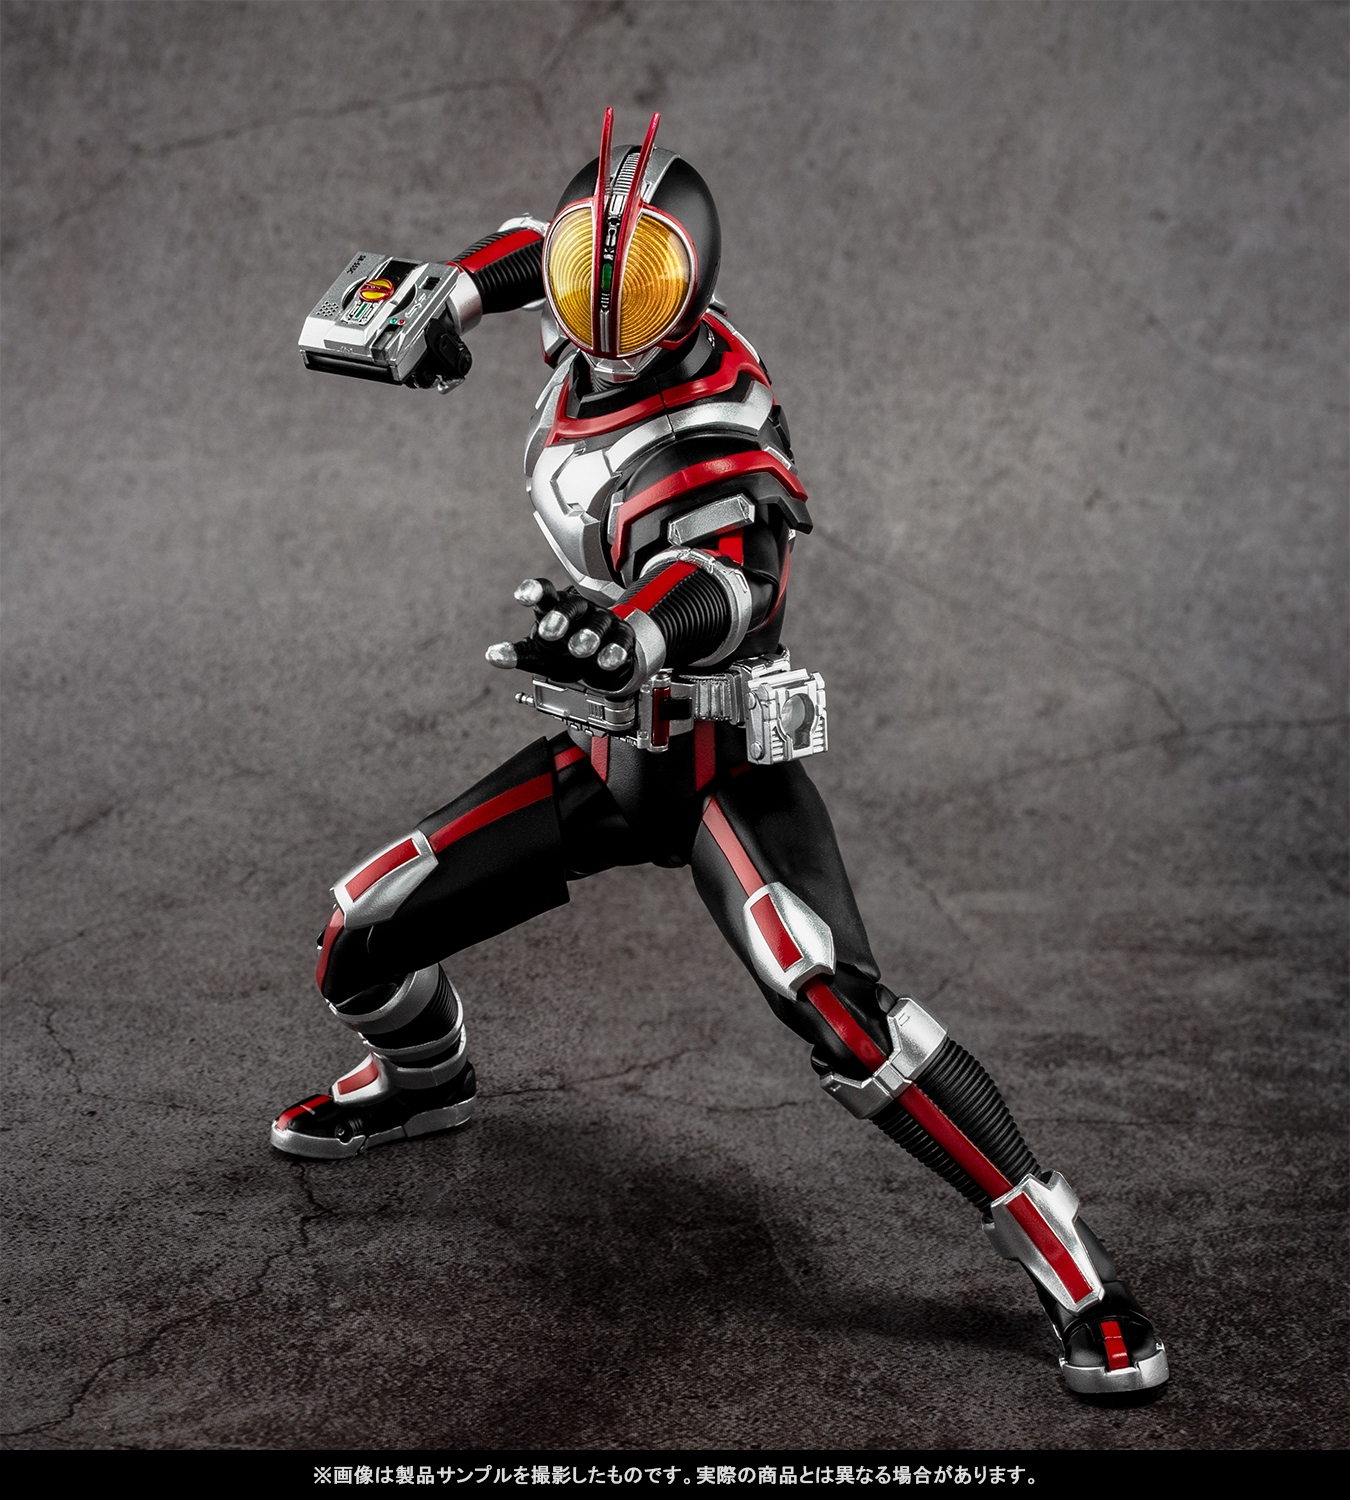 S.H.Figuarts 真骨彫製法　仮面ライダー555 仮面ライダーファイズ